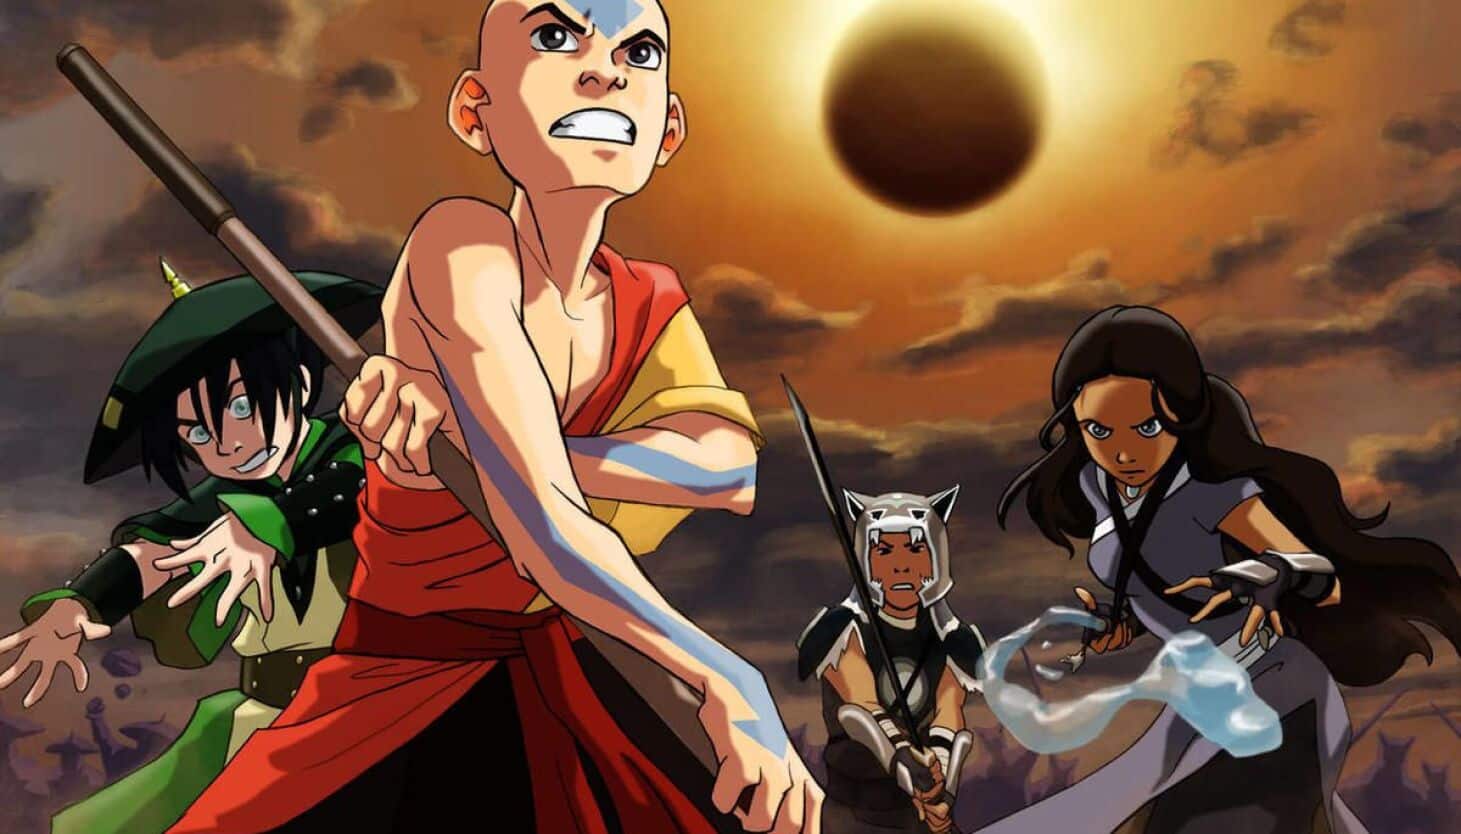 the cast of the last airbender preparing for battle